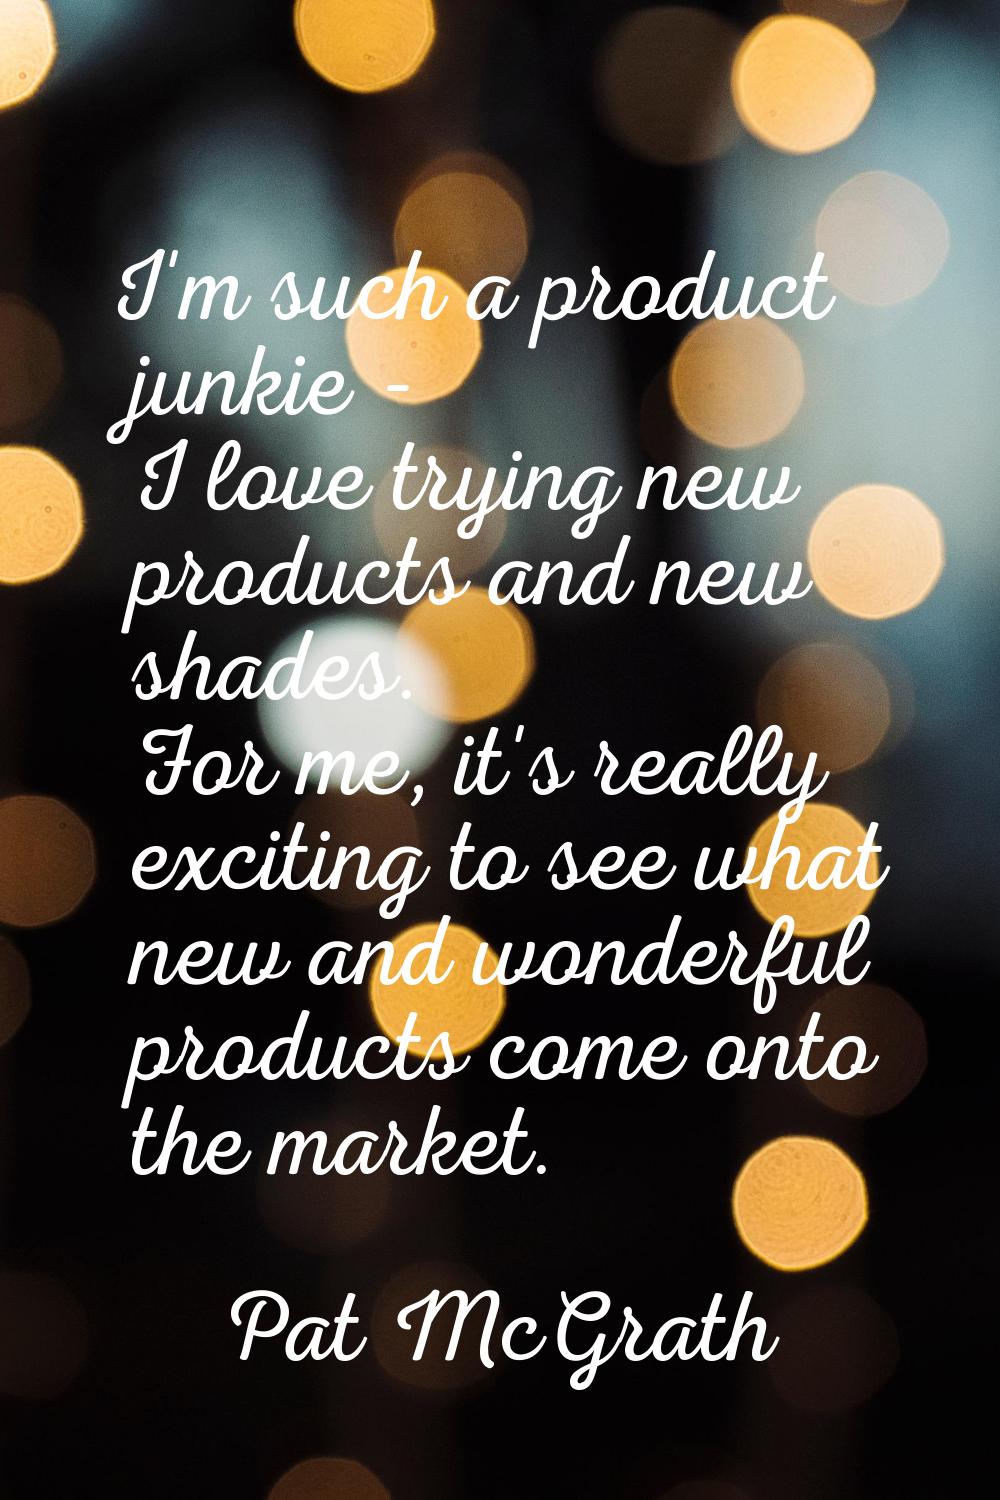 I'm such a product junkie - I love trying new products and new shades. For me, it's really exciting